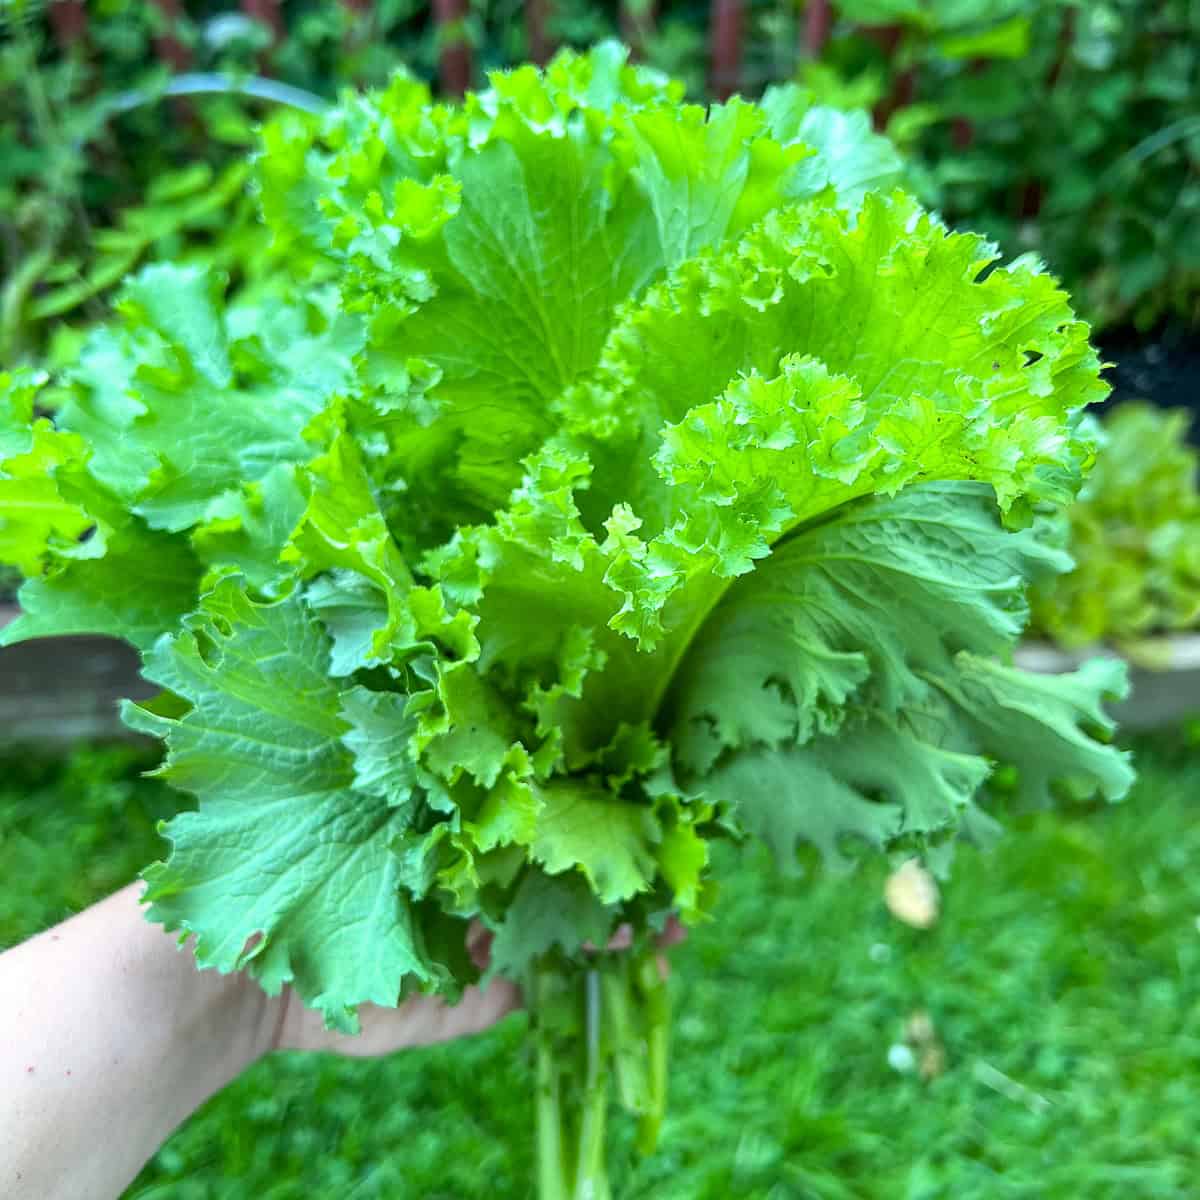 An image of a woman's hand holding mustard greens.